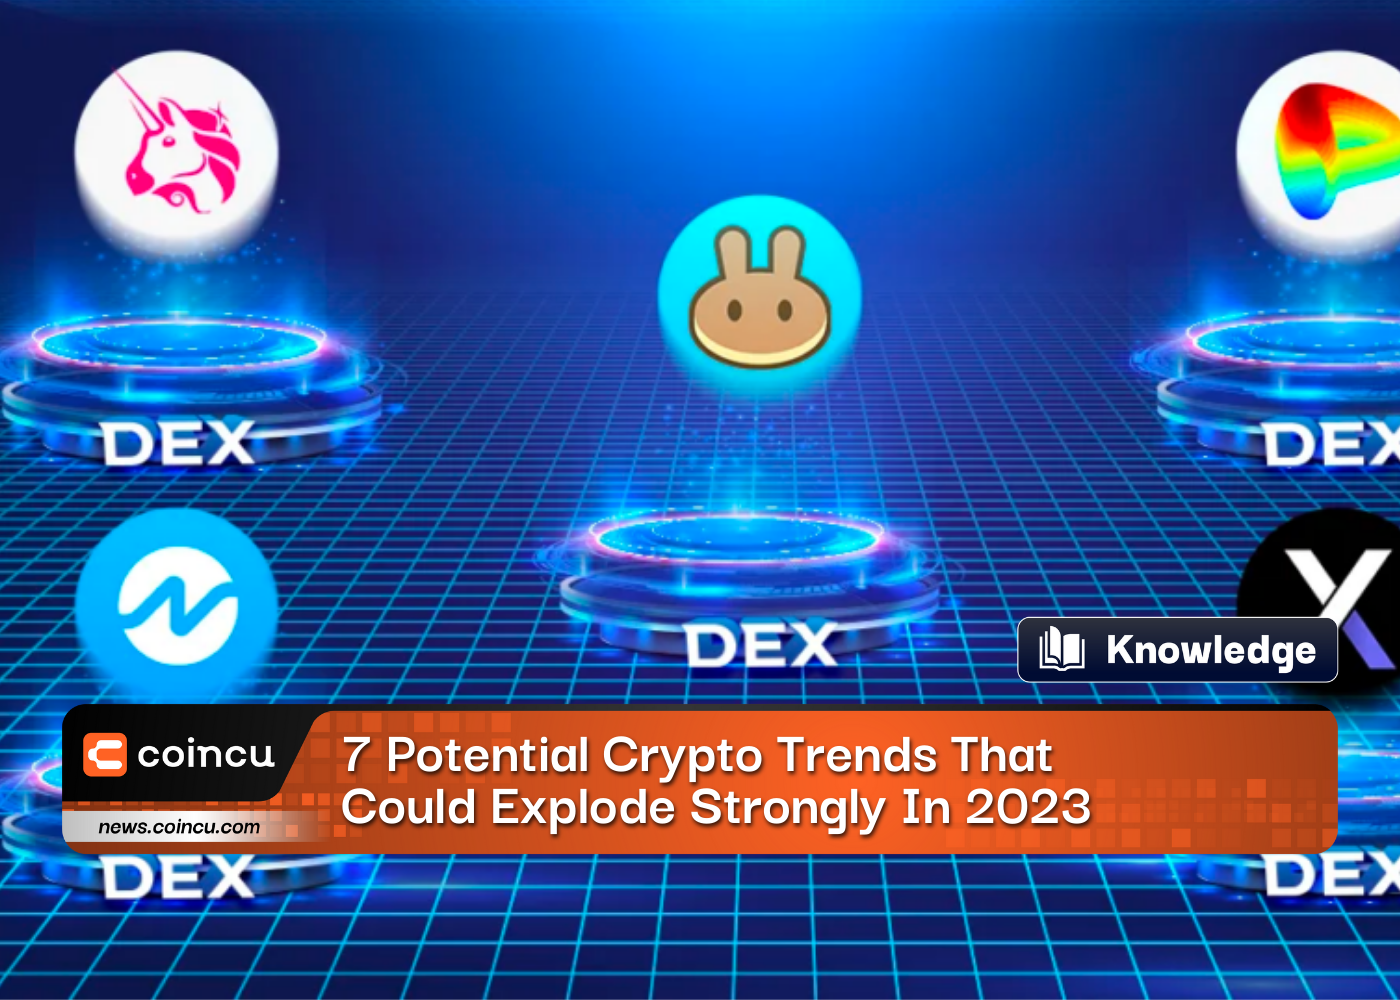 7 Potential Crypto Trends That Could Explode Strongly In 2023